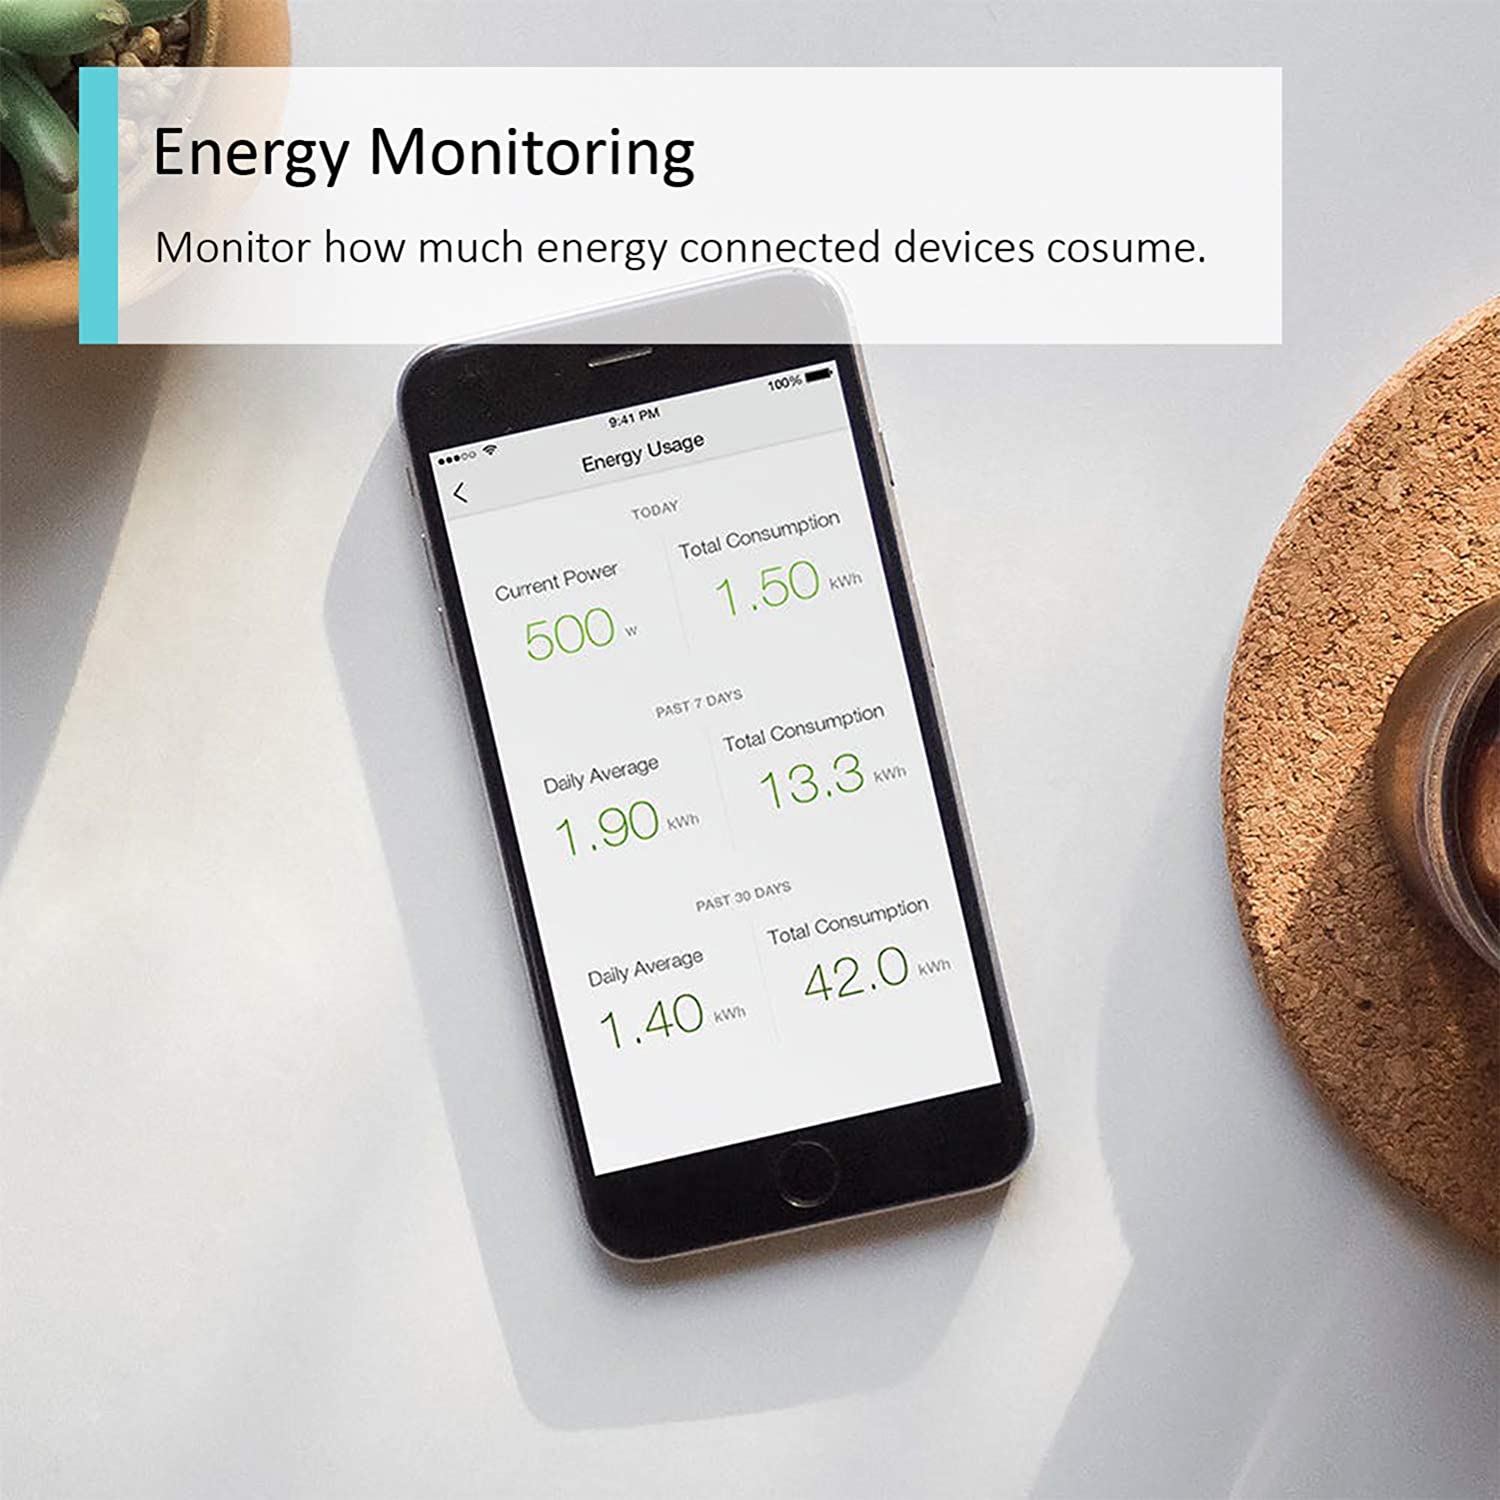 KP115 Kasa Mini Smart Plug with Energy Monitoring(available in early March)